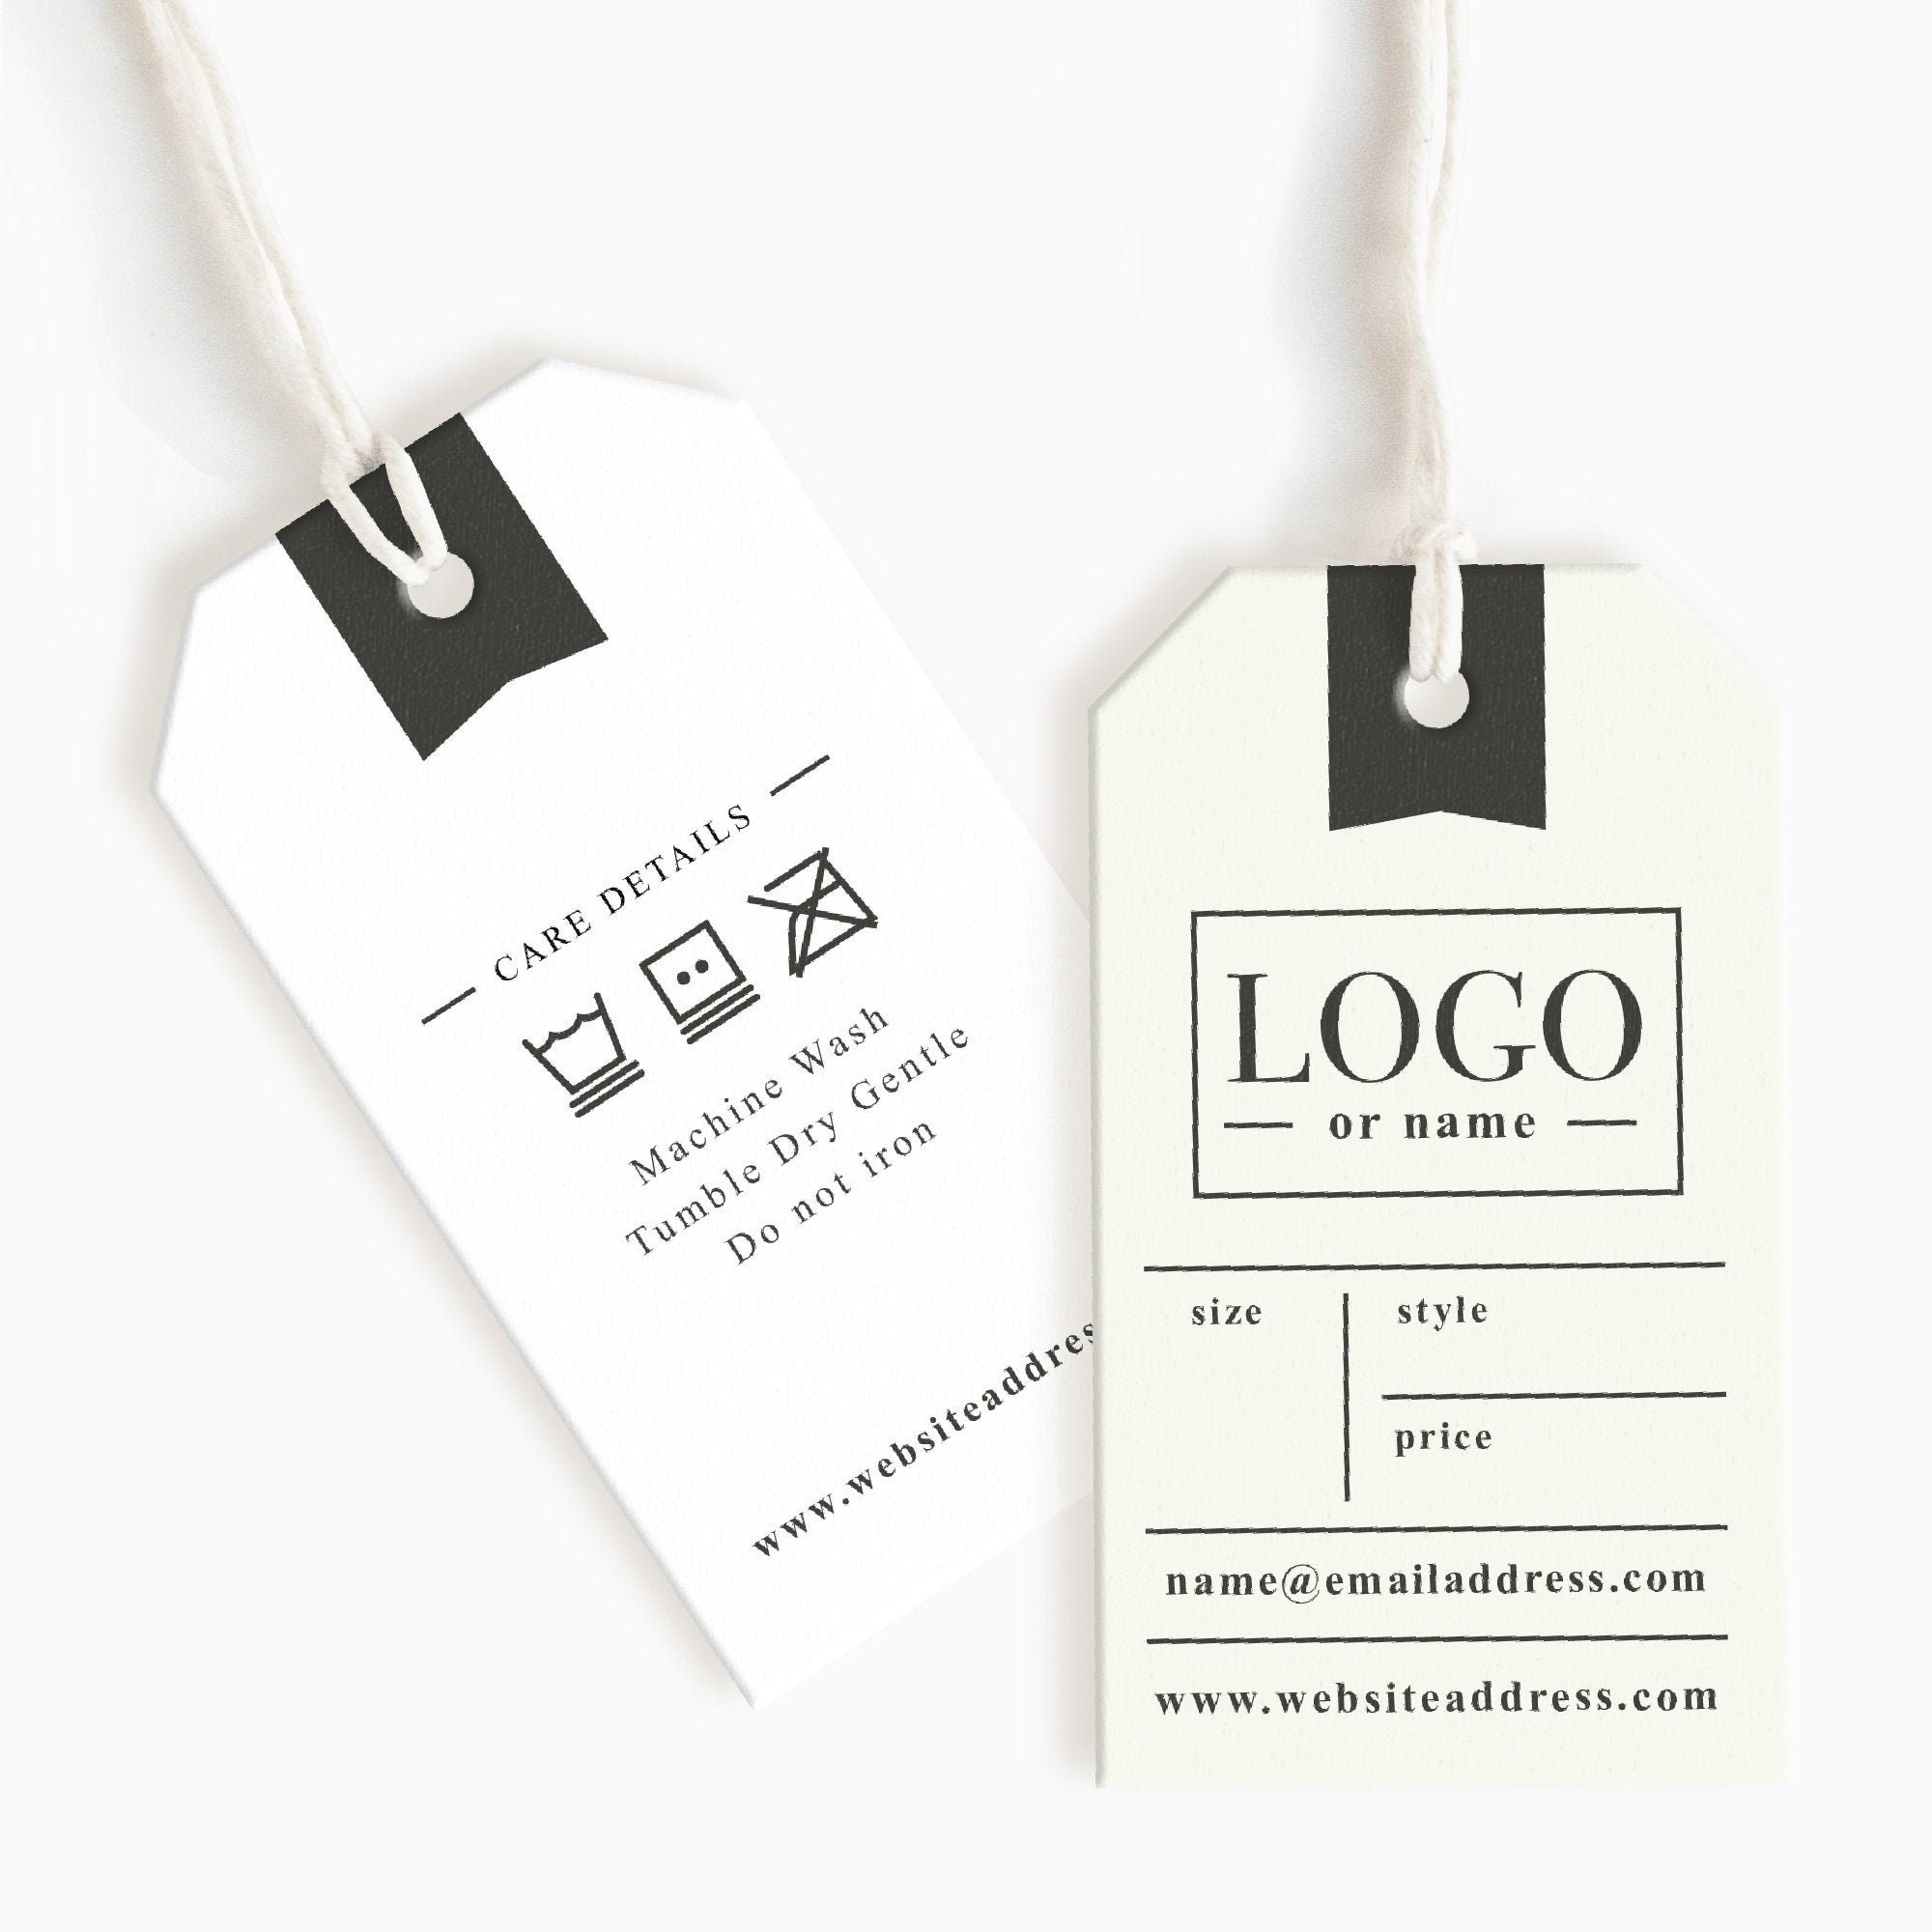 Design socks and clothing tags, labels hang or swing tags by